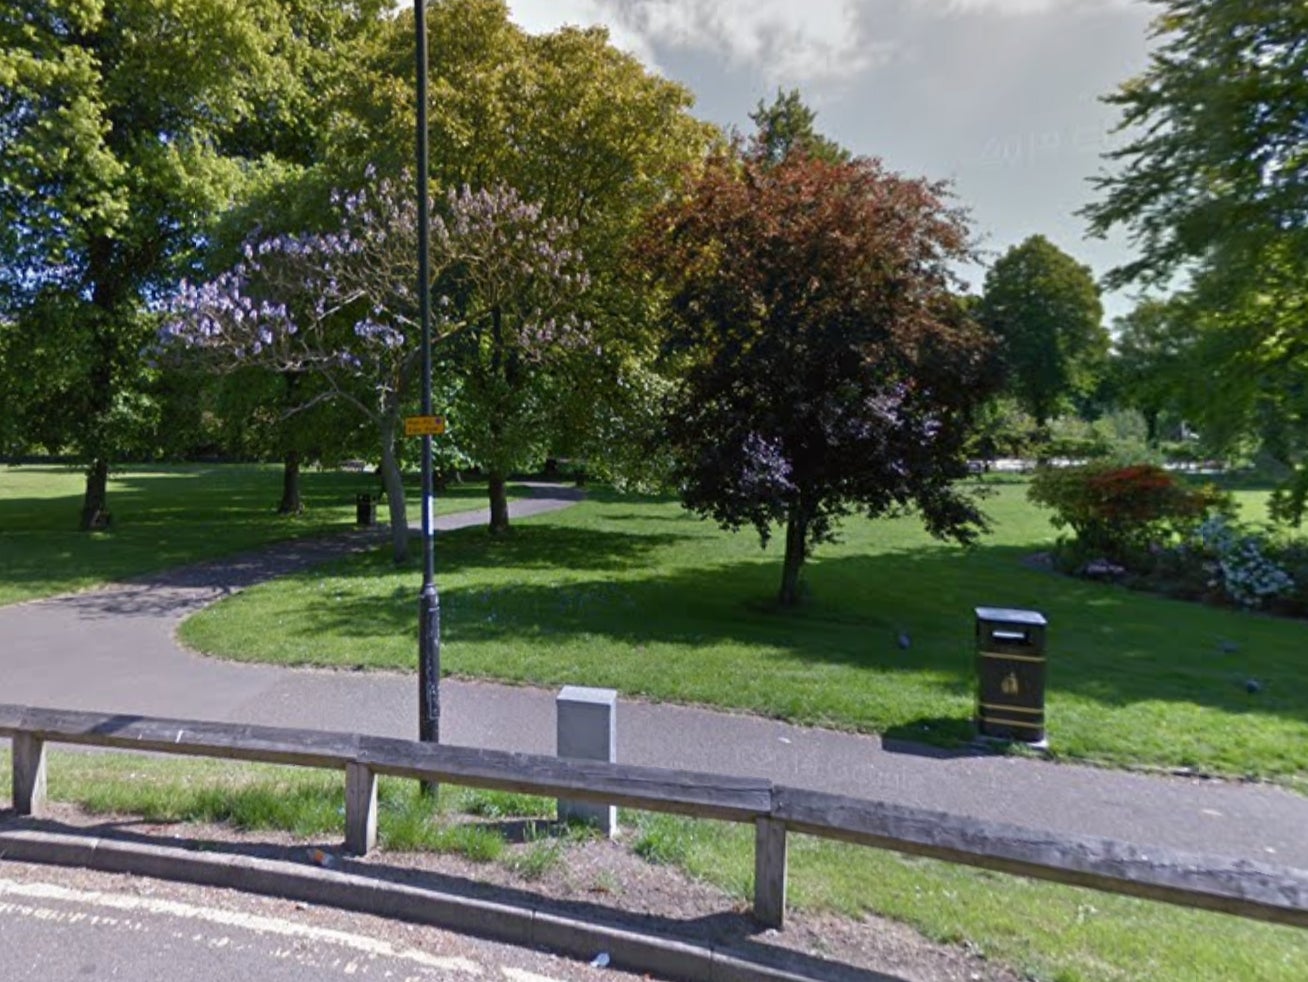 One of the alleged victims was reportedly raped in Riversley Park (pictured) between 7-8pm